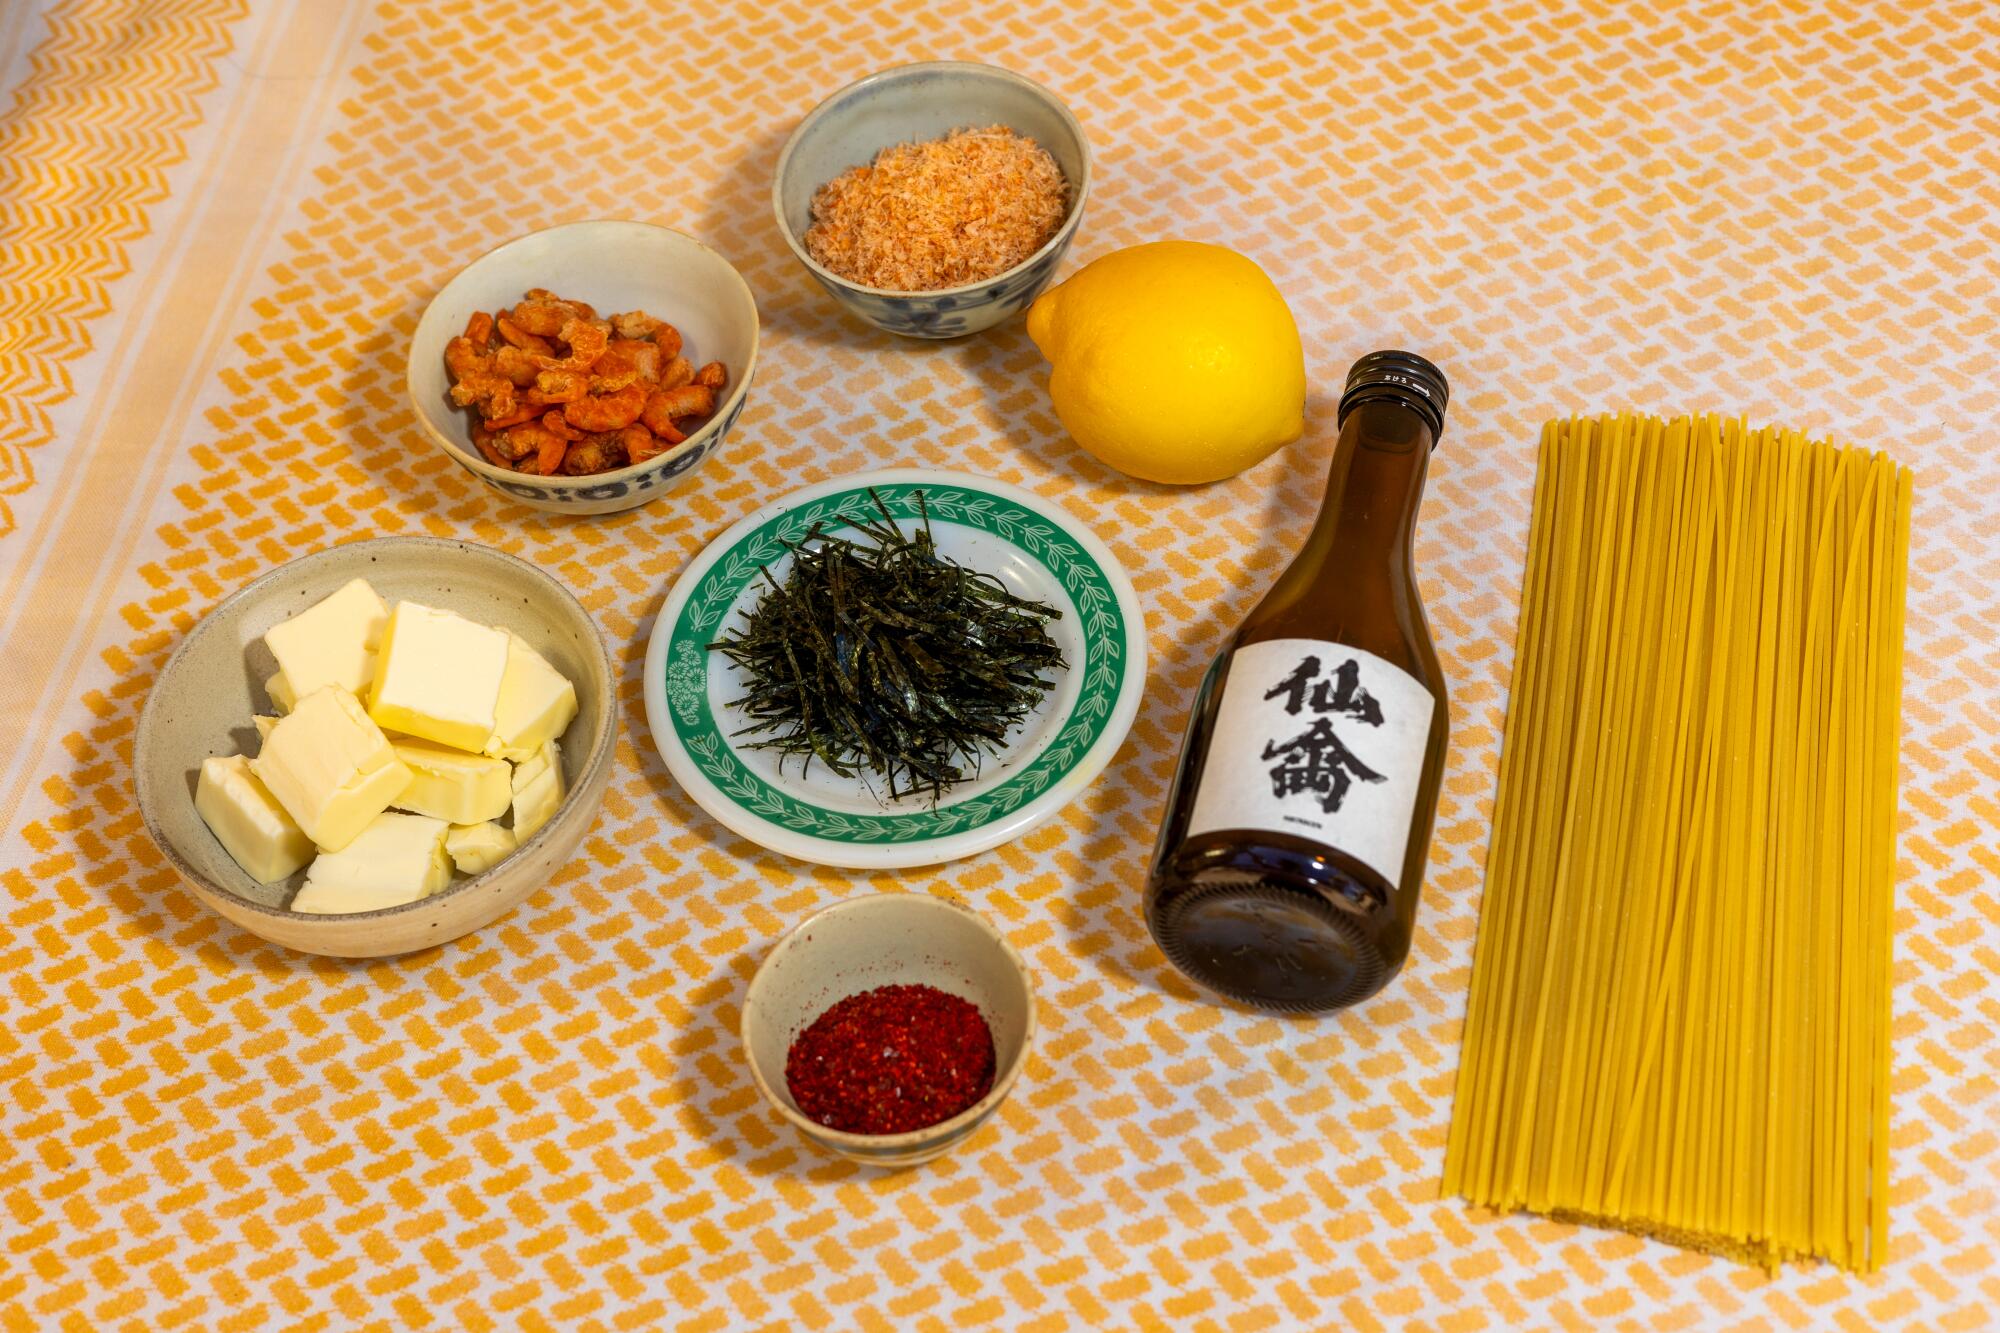 Small dishes of unsalted butter, chili powder, sake, dried shrimp and nori with a lemon, spaghetti and bottle of sake